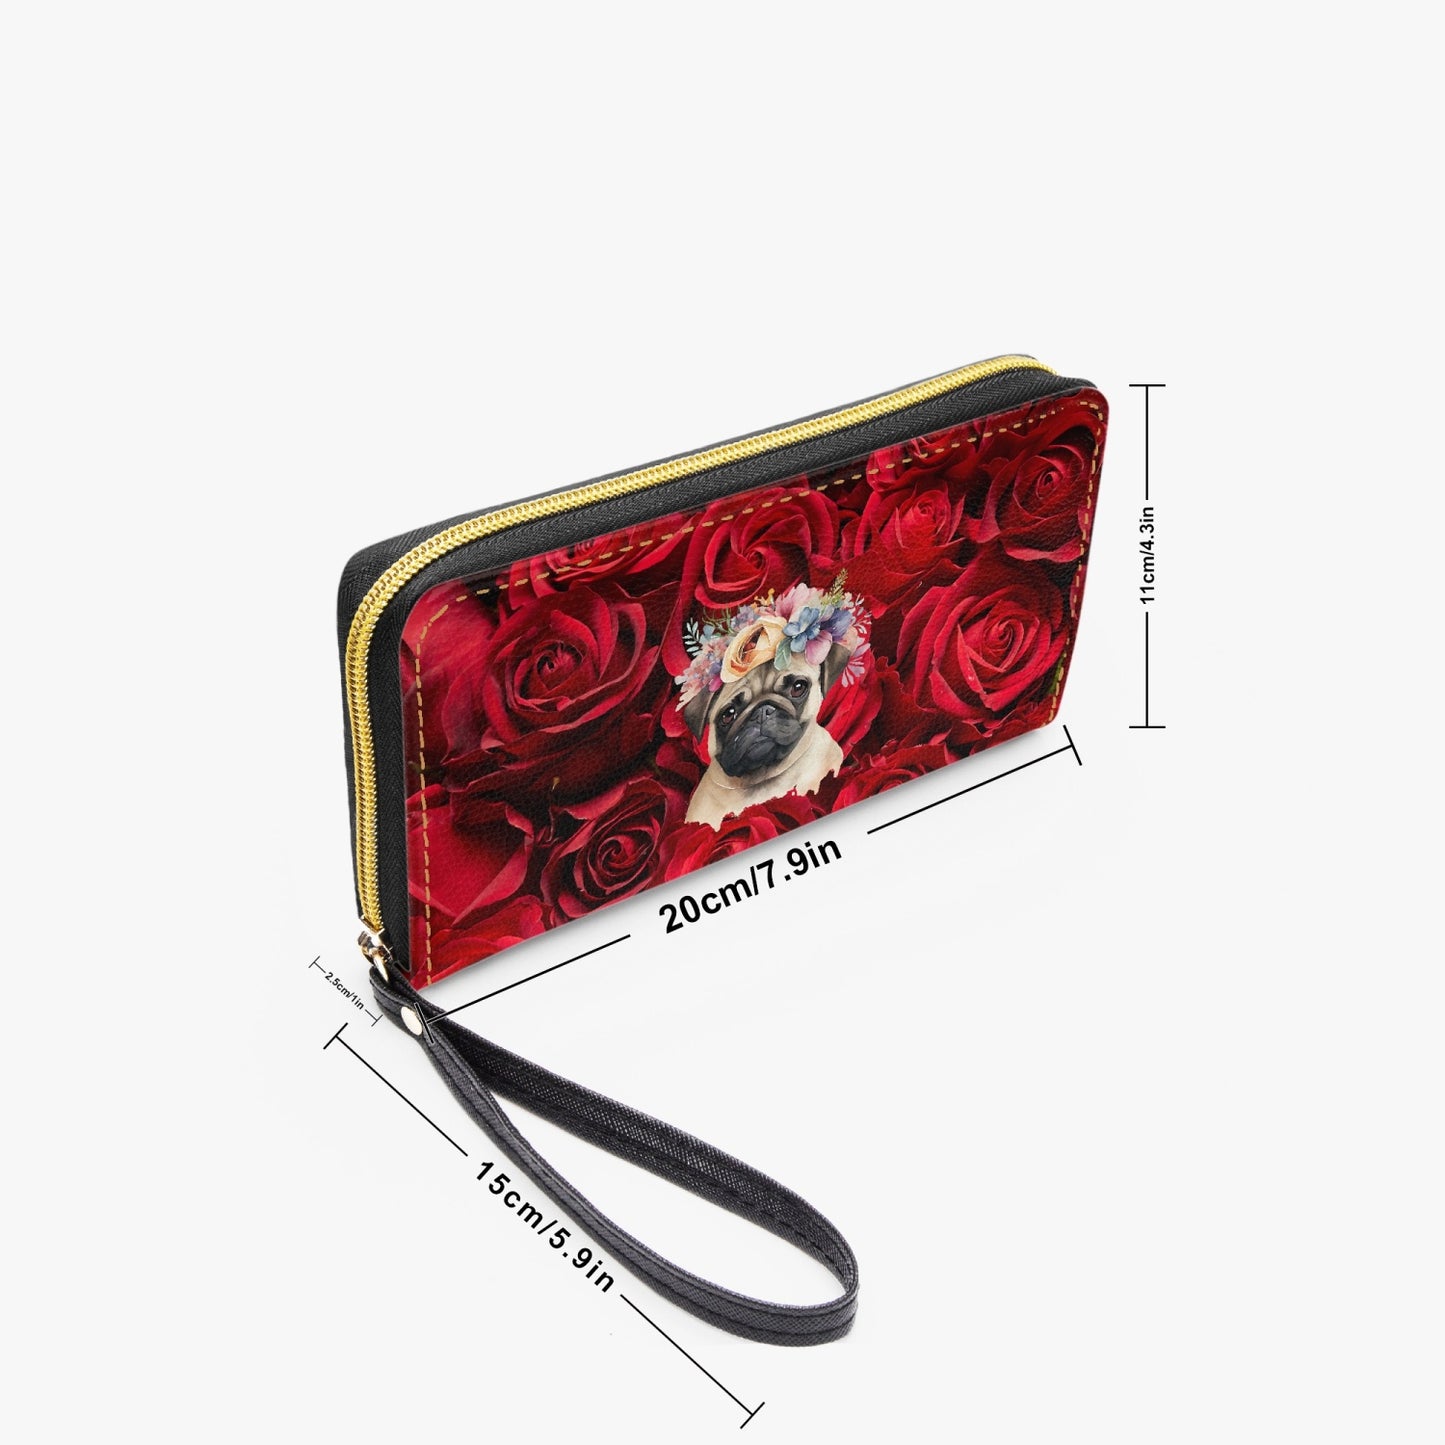 A PUG OF ROSES . PU Leather Wristlet Clutch Wallet